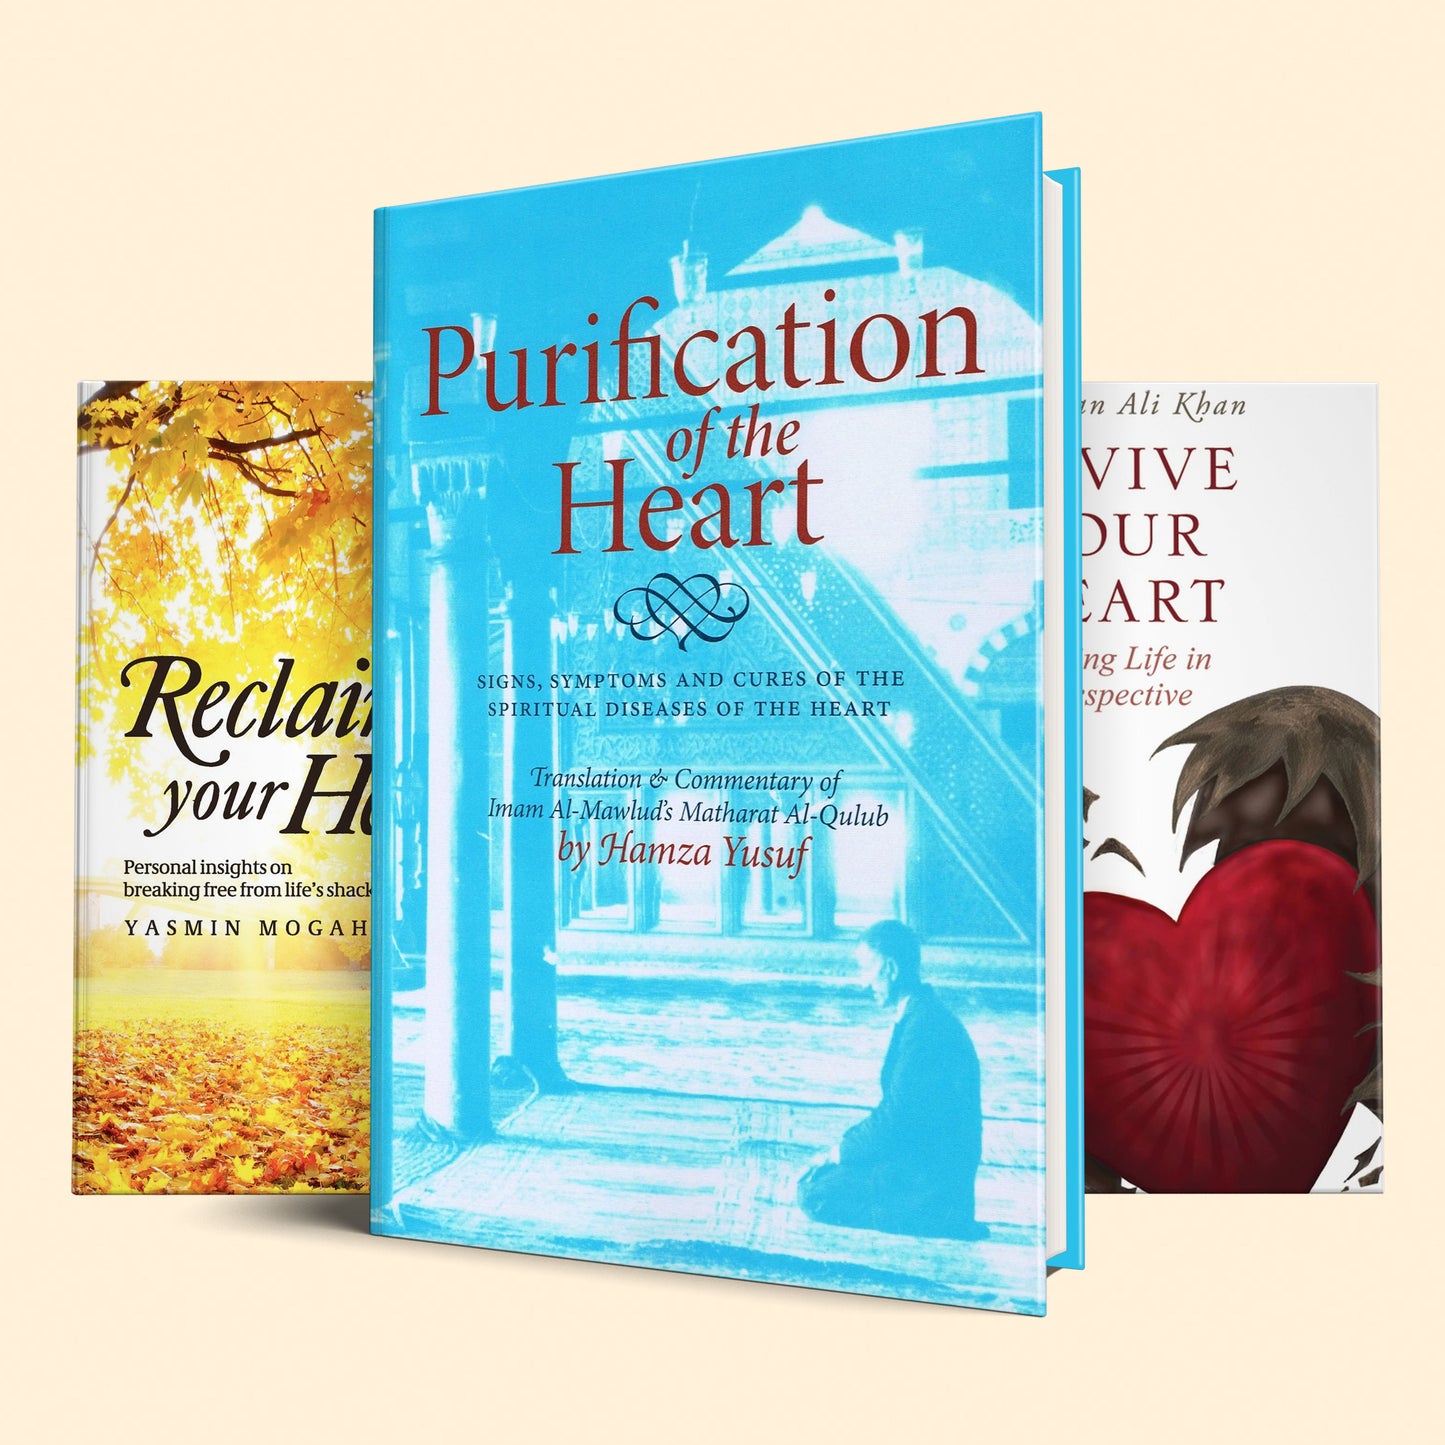 The Heart's Pathway Book Set : Reclaim your heart, Revive your heart, Purification of the heart